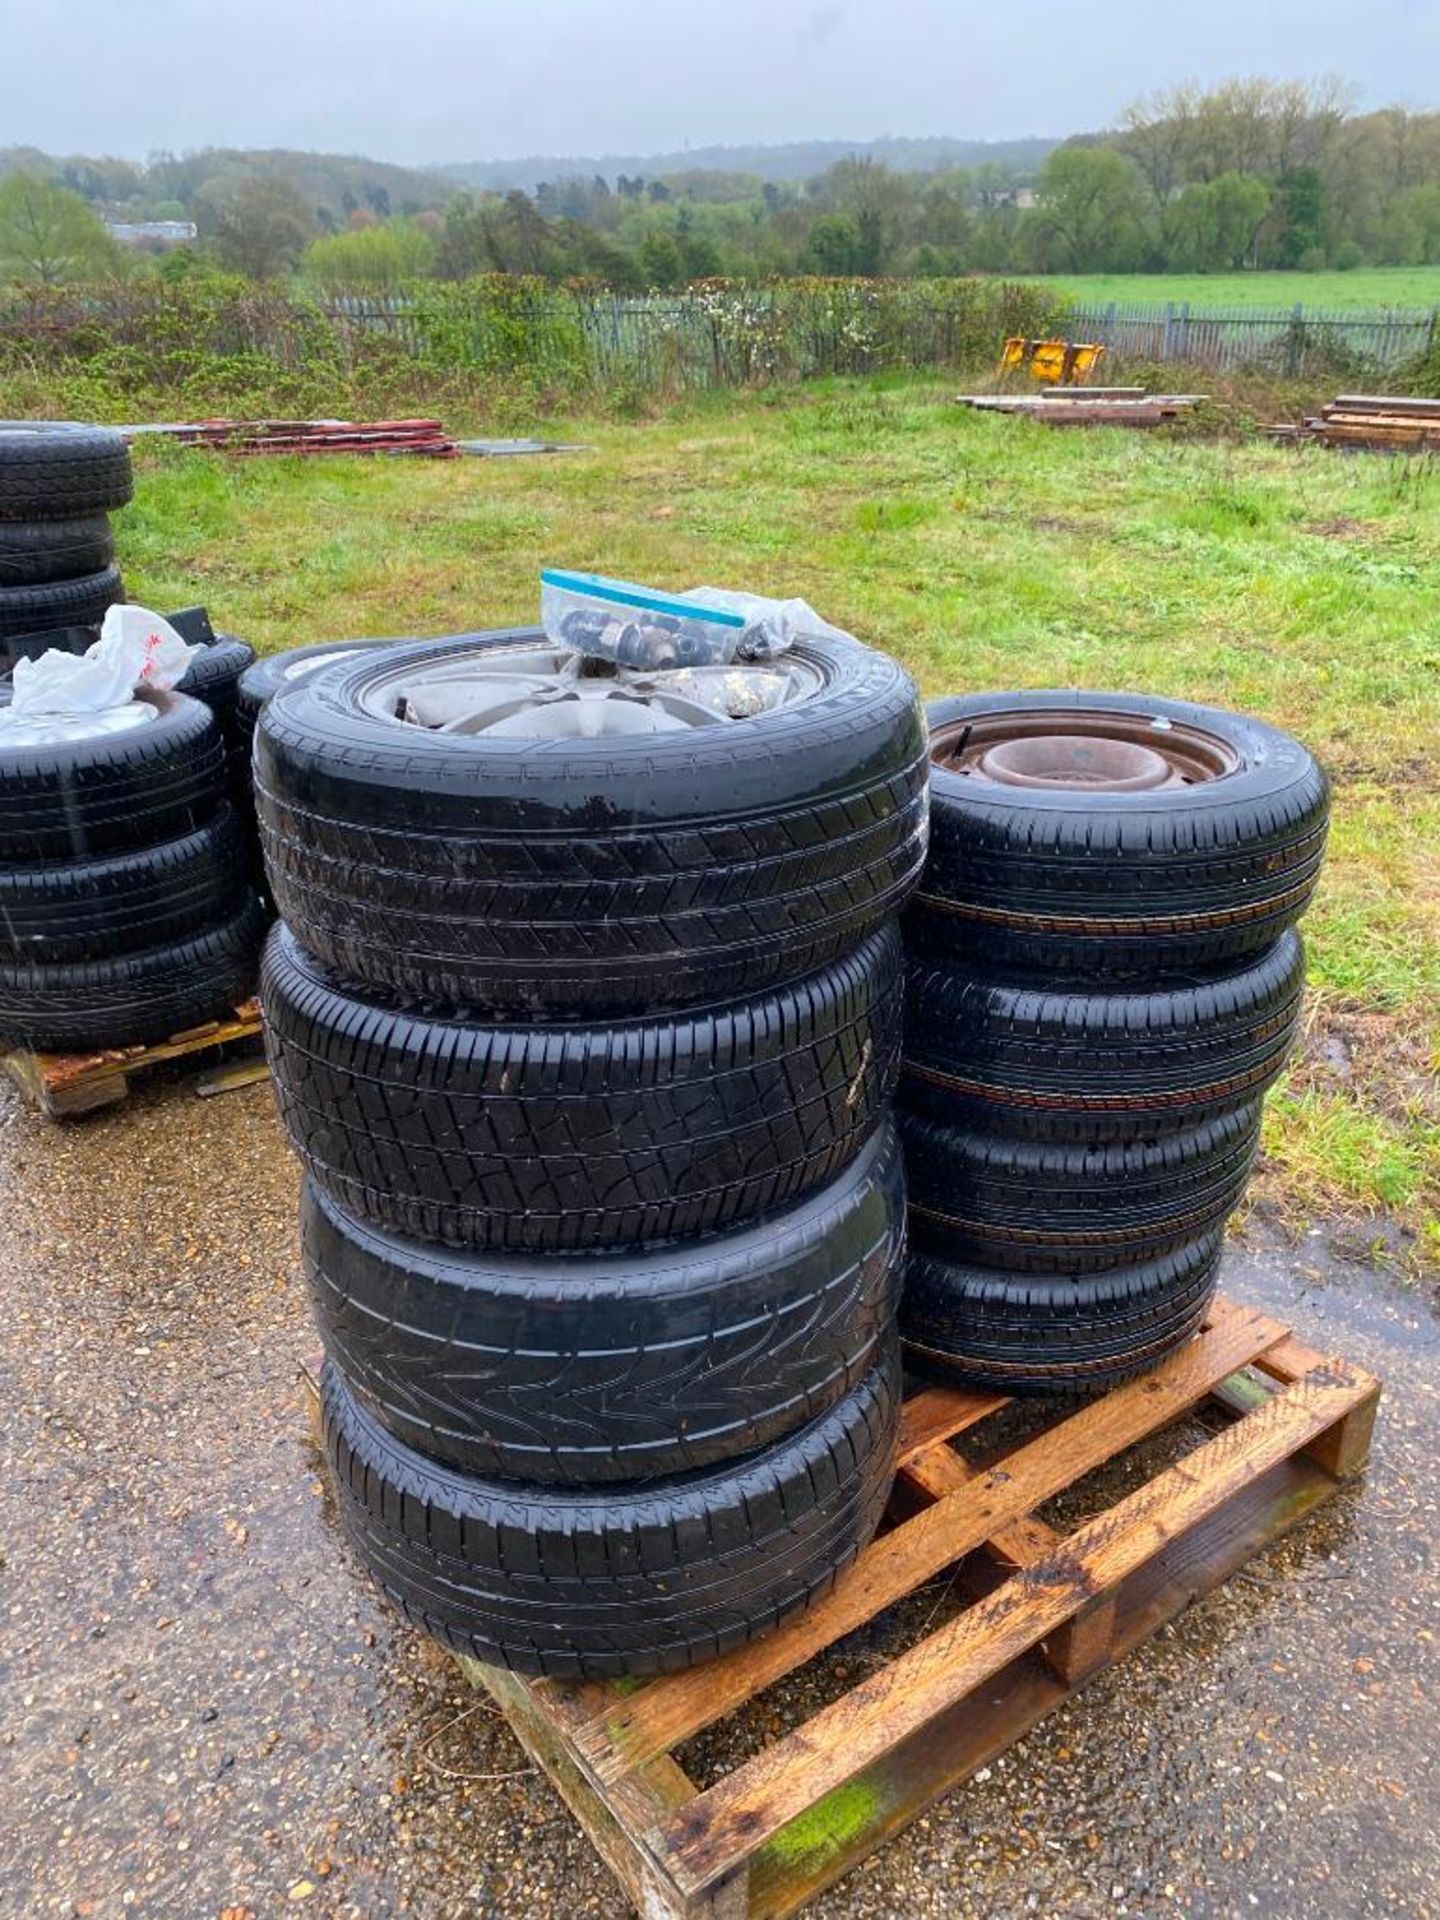 4 (no) Land Rover wheels and tyres & 4 (no) various wheels and tyres